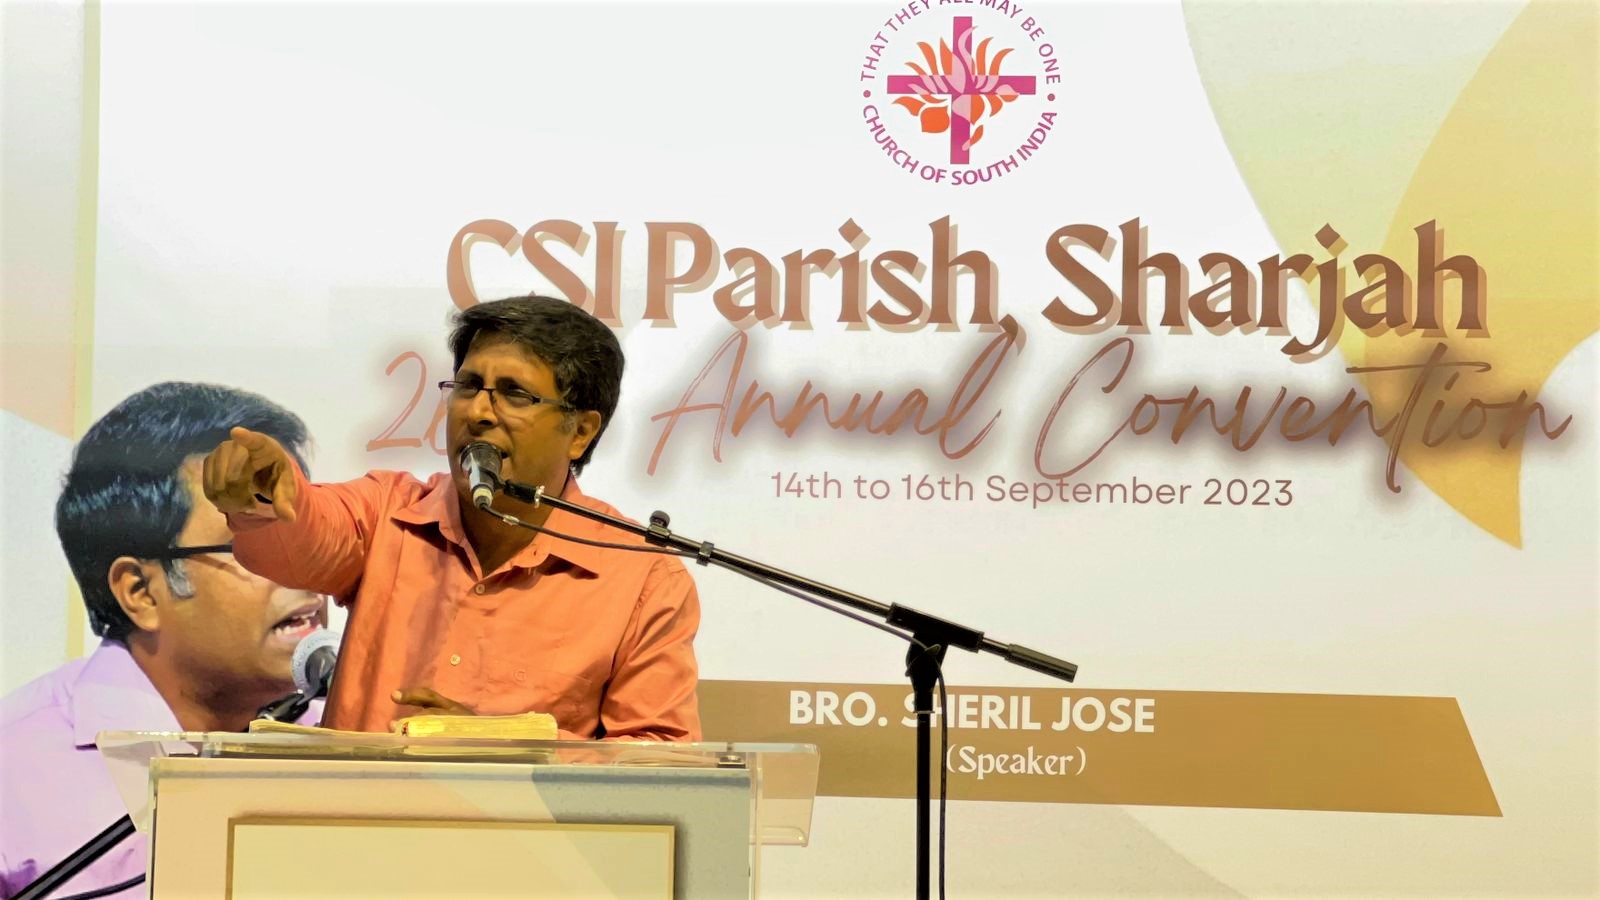 Brother Sheril Jose speaks the word of God